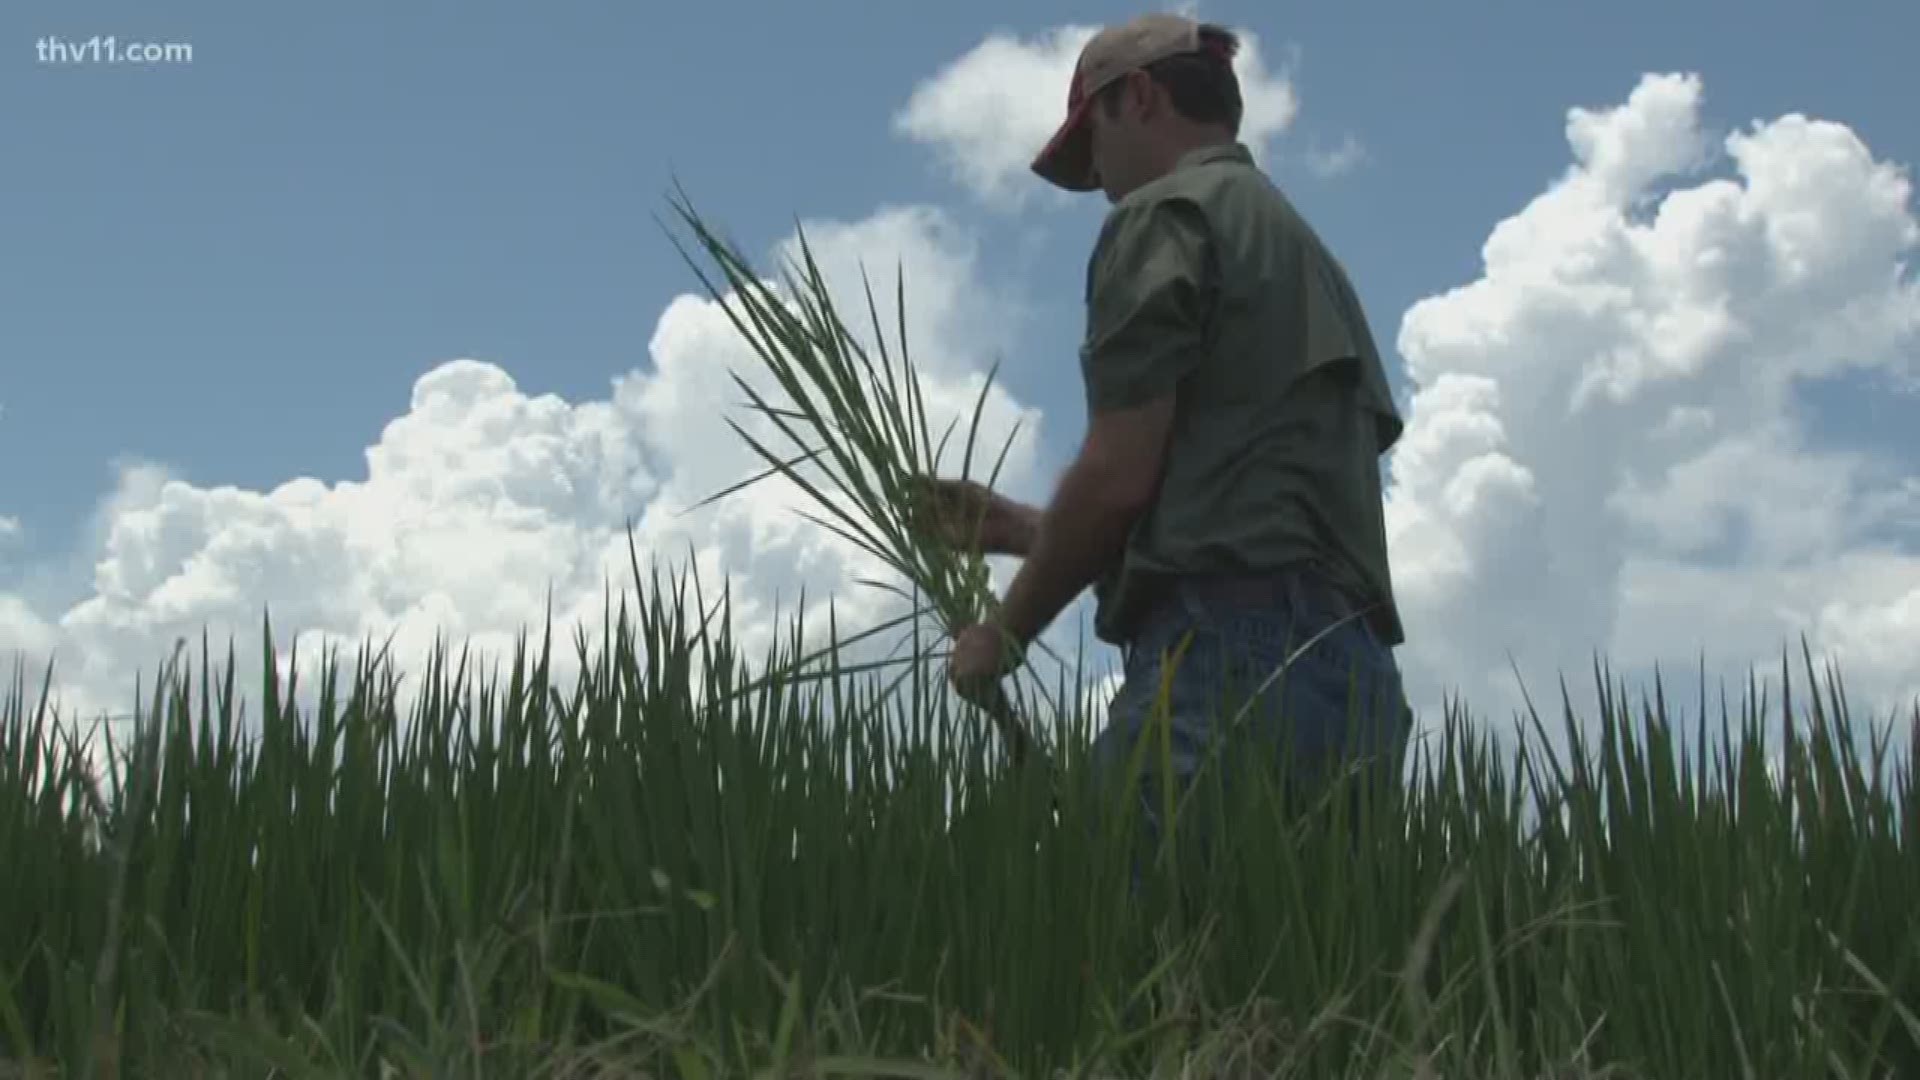 With almost no sign of rain in the forecast, farmers in Arkansas are more concerned about the water supply.